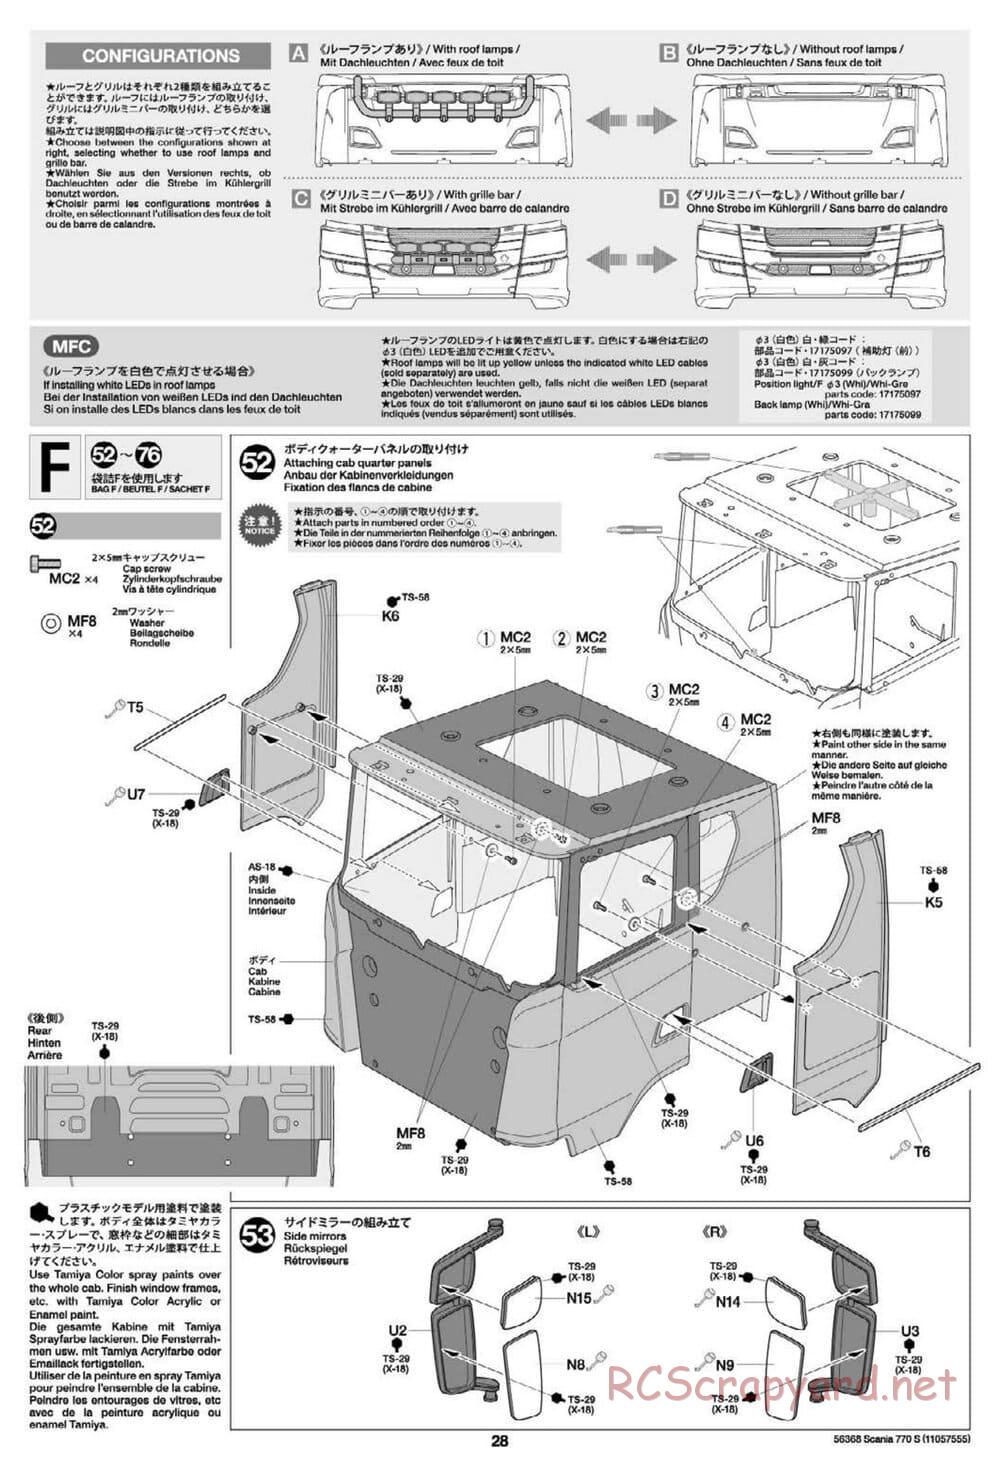 Tamiya - Scania 770S 6x4 Tractor Truck Chassis - Manual - Page 28